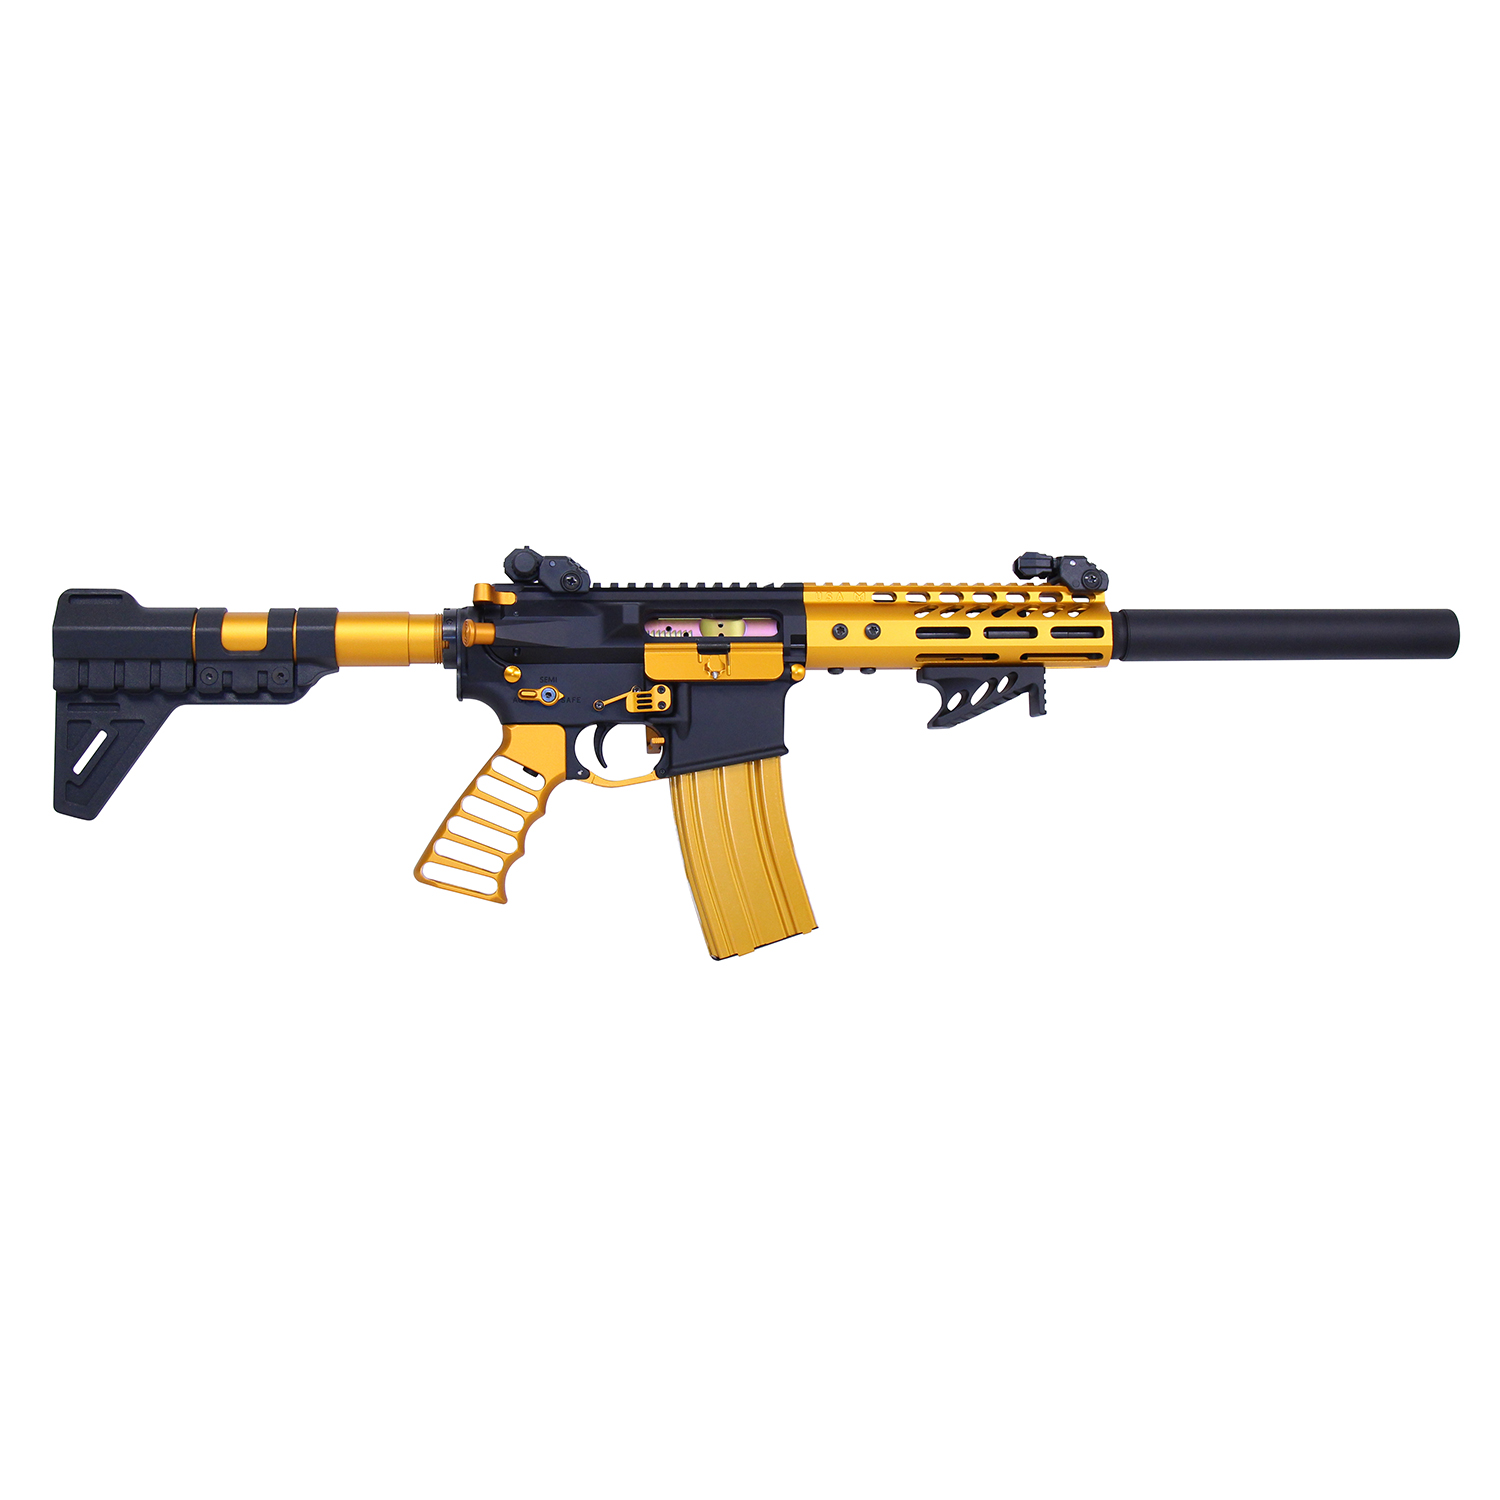 Gold-accented AR-15 rifle with a 9-inch mock suppressor and modern design.